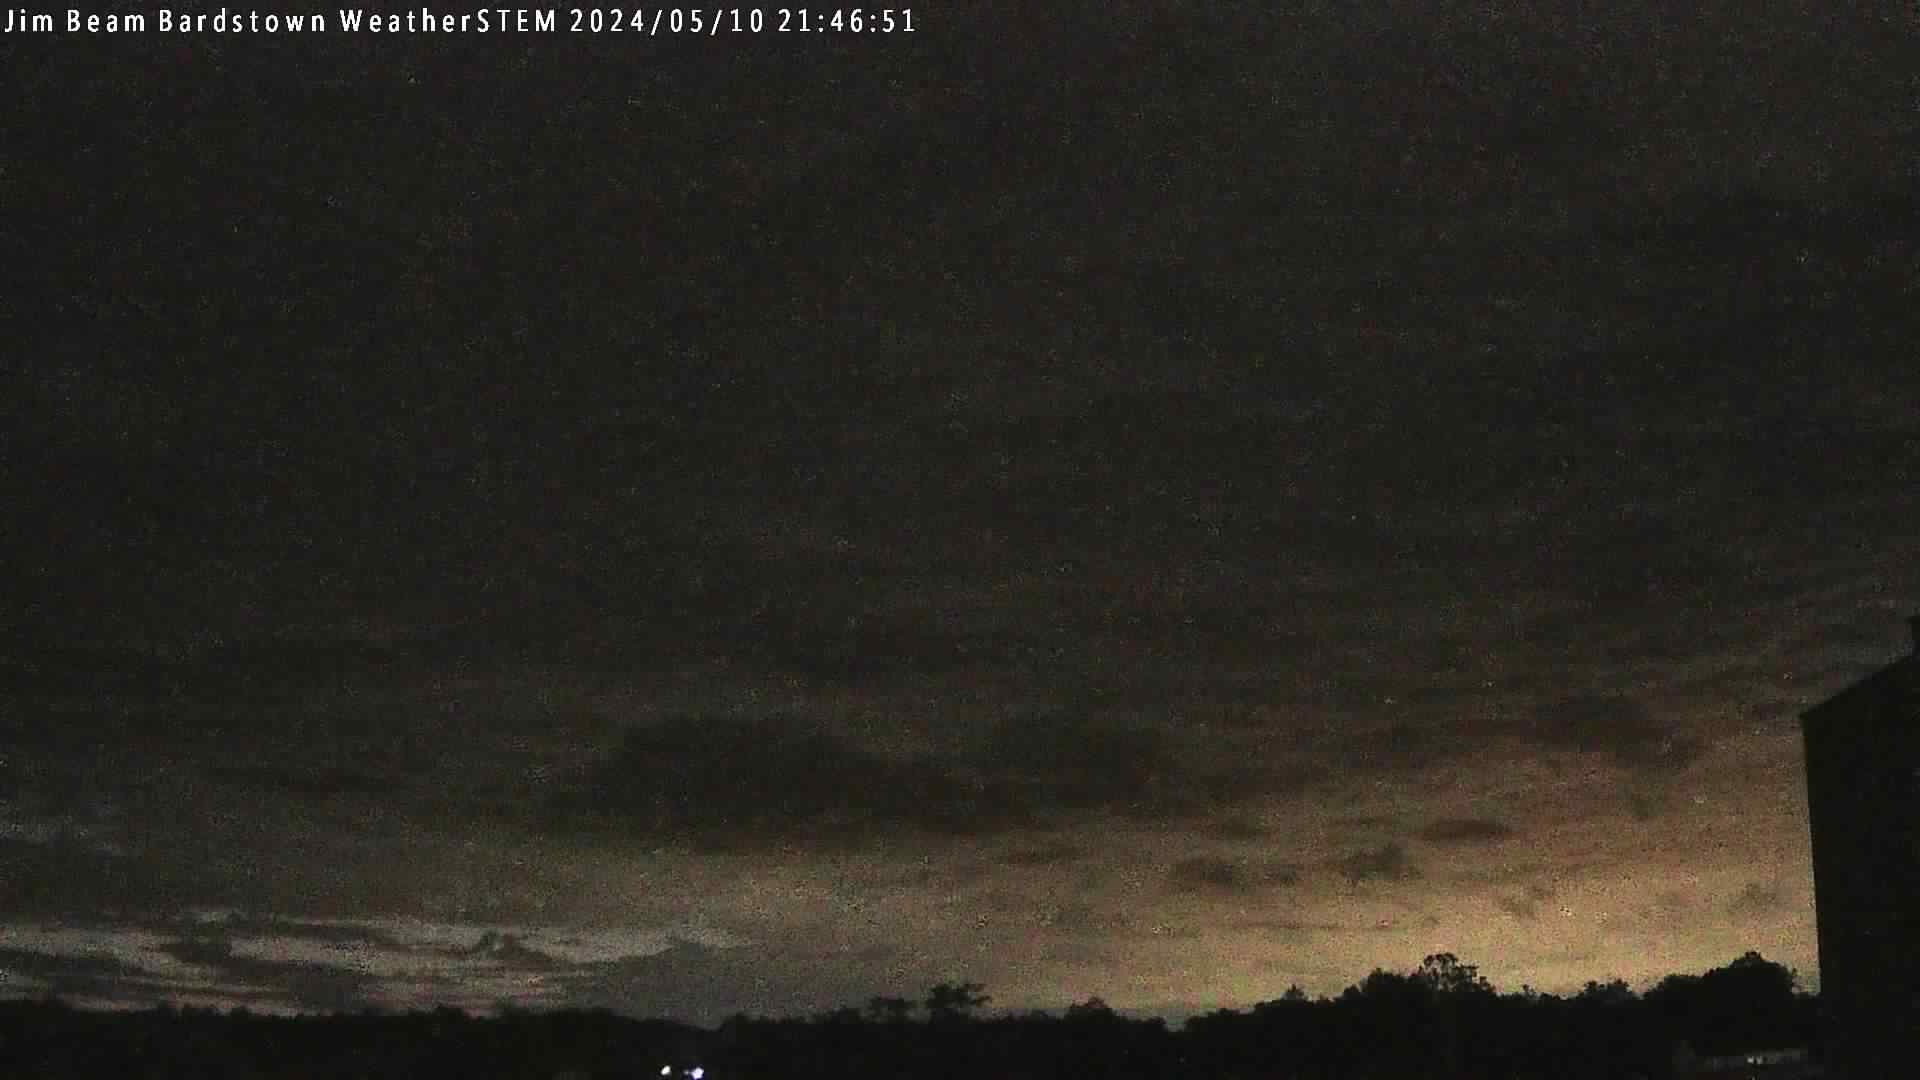  WeatherSTEM Cloud Camera null in Nelson County, Kentucky KY at Jim Beam Bardstown